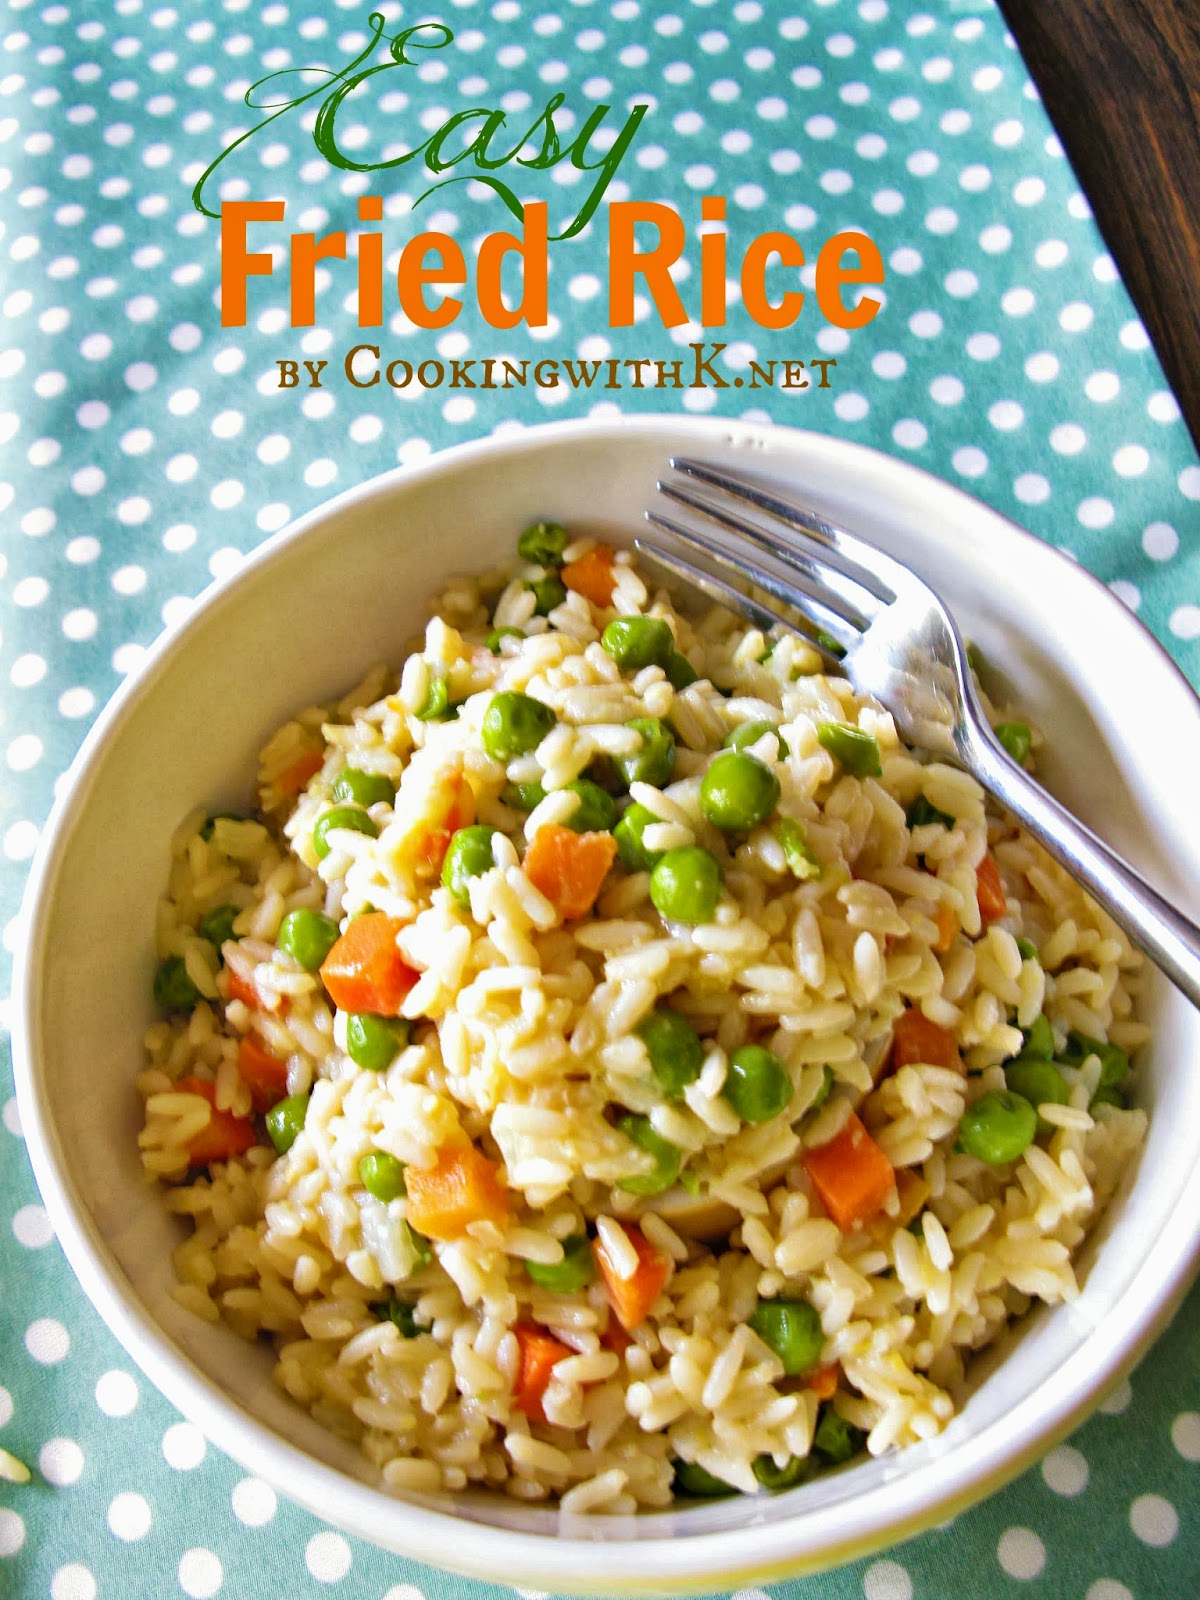 Cooking with K: Easy Fried Rice {No Need for Take Out---Make it yourself!}